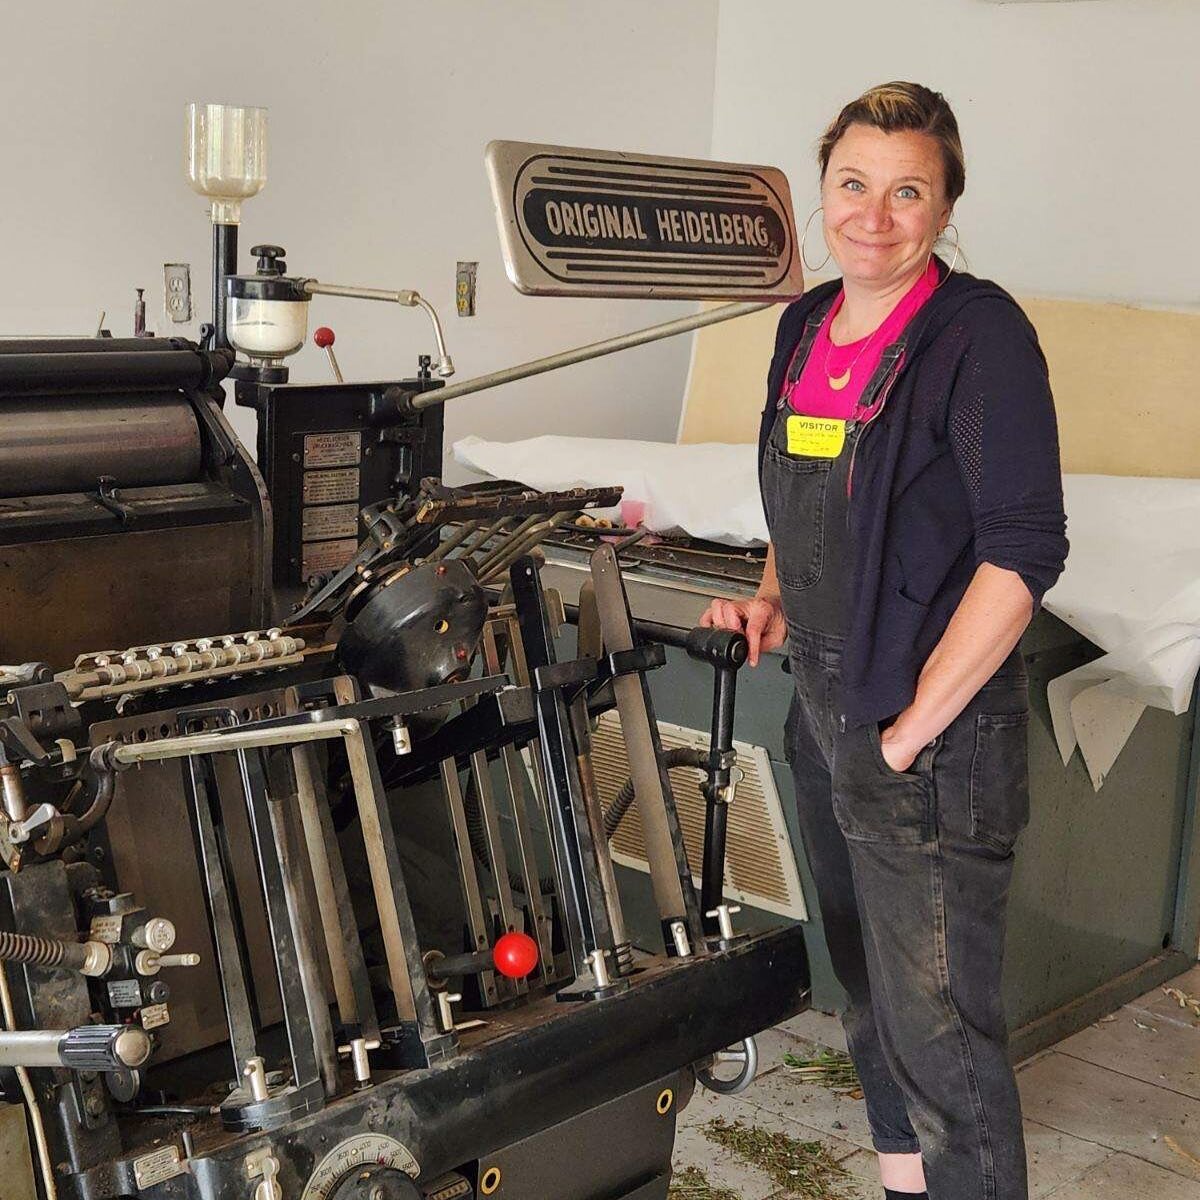 This is the face of a deliriously happy printer, who is now the proud owner &amp; caretaker of a gorgeous 1972 Heidelberg Windmill!! (📸: @wolfeprints) I&rsquo;m overwhelmed with gratitude for everyone who had a hand in this: from the darling @pickwi